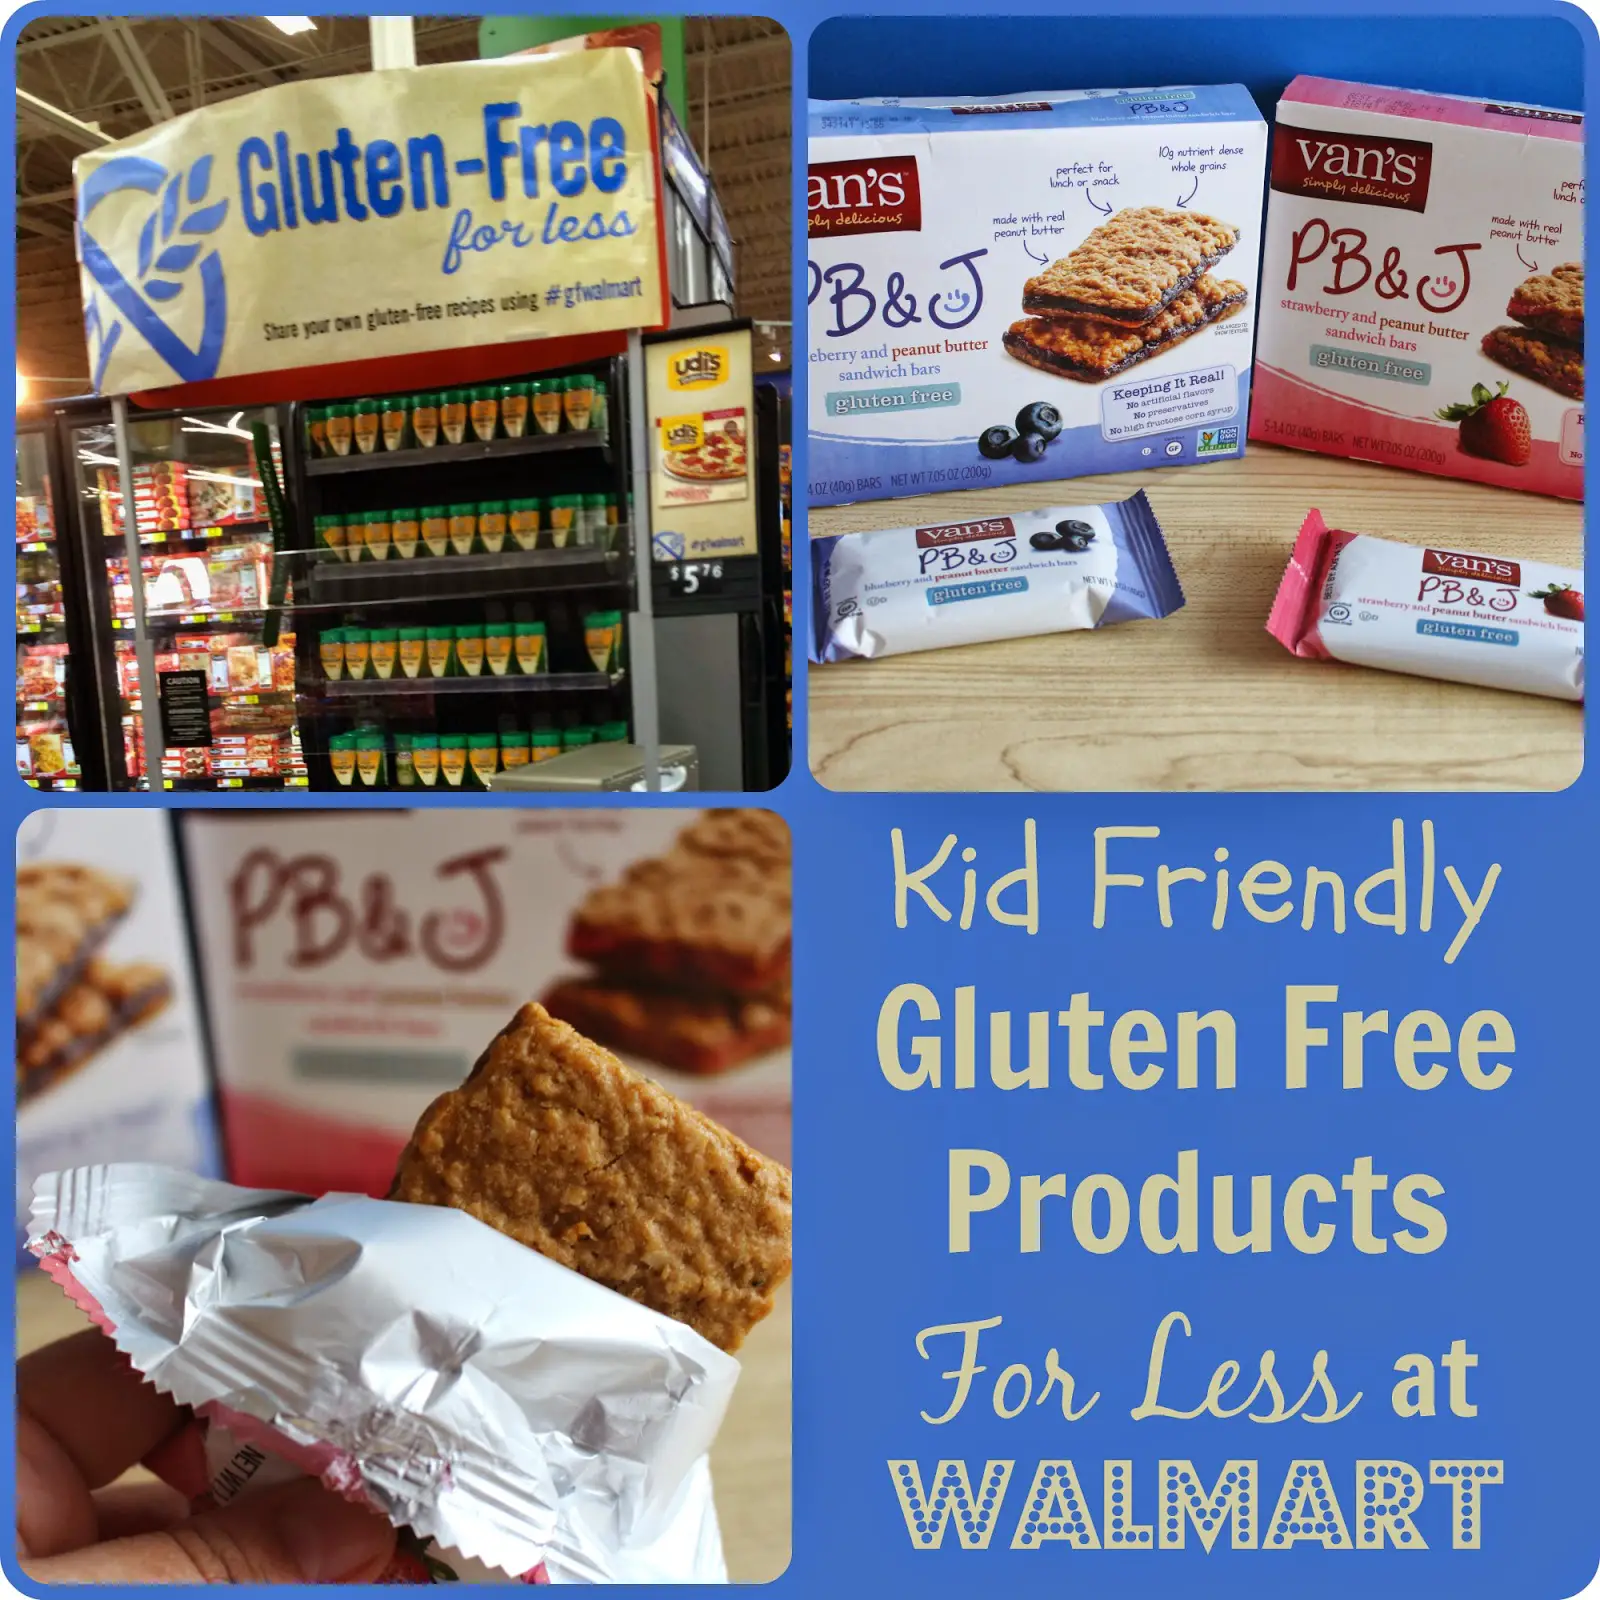 Kid Friendly Gluten Free Products For Less at Walmart